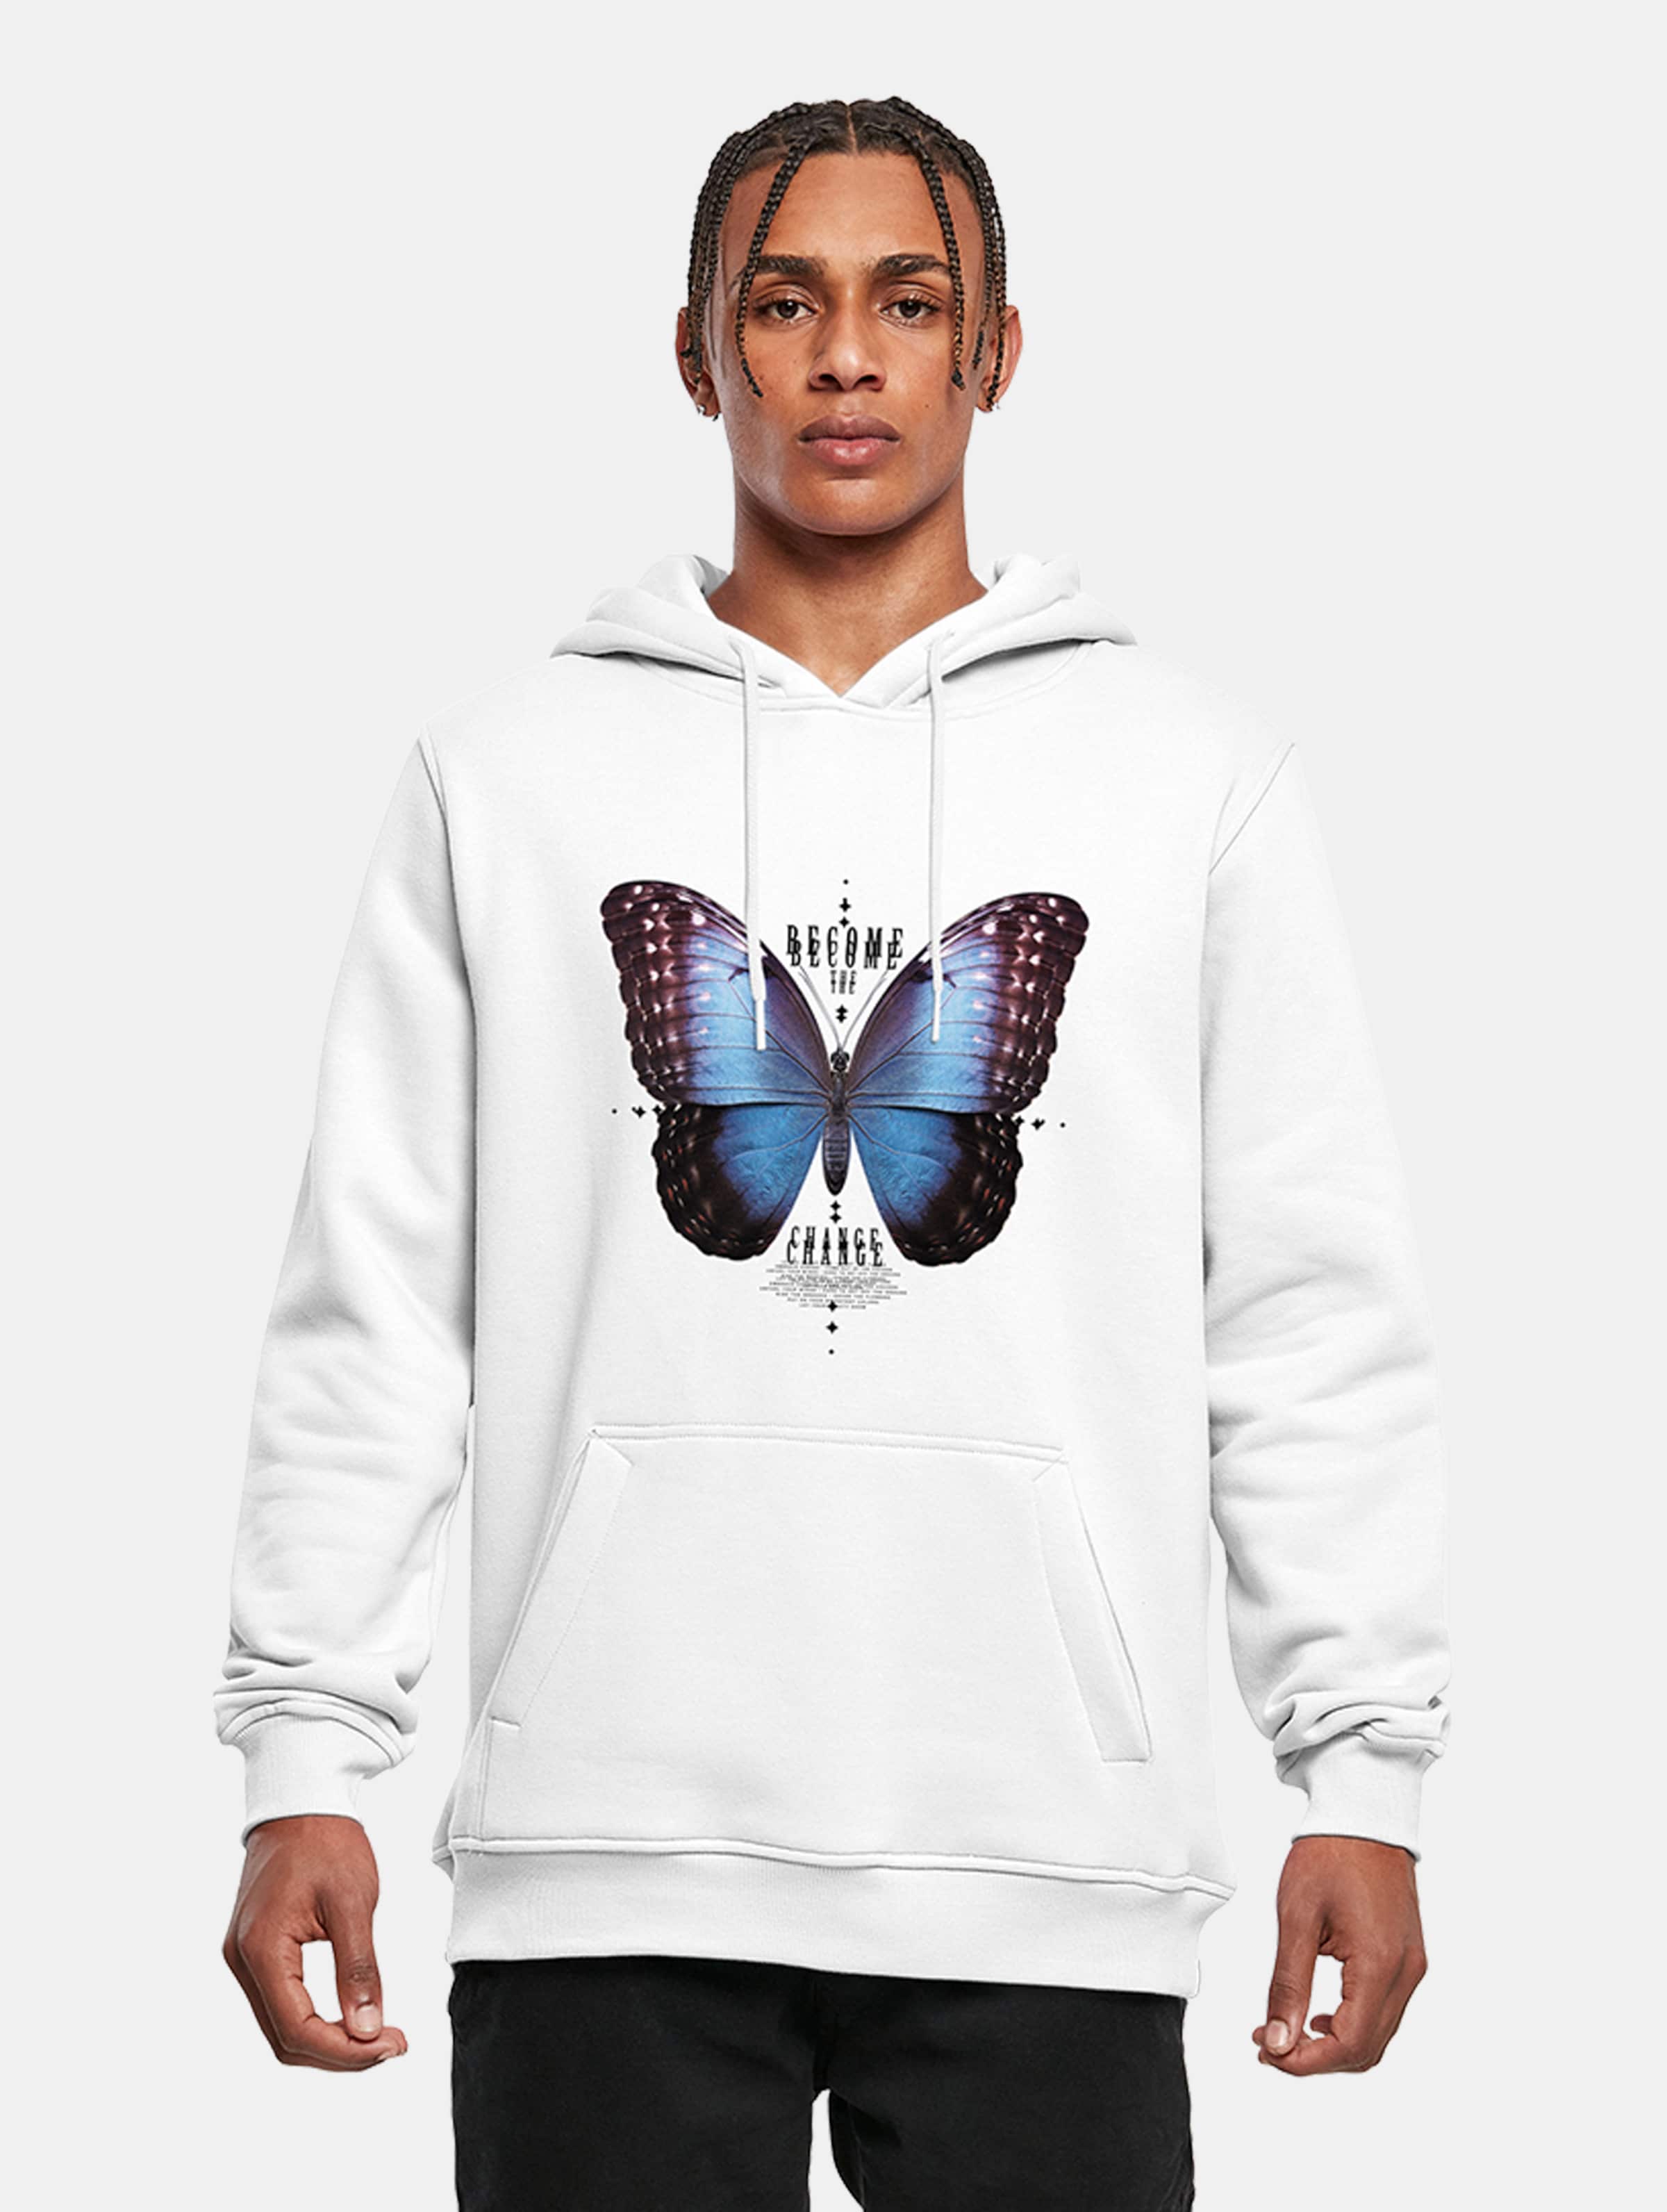 Mister Tee - Become The Change Butterfly Hoodie/trui - 3XL - Wit